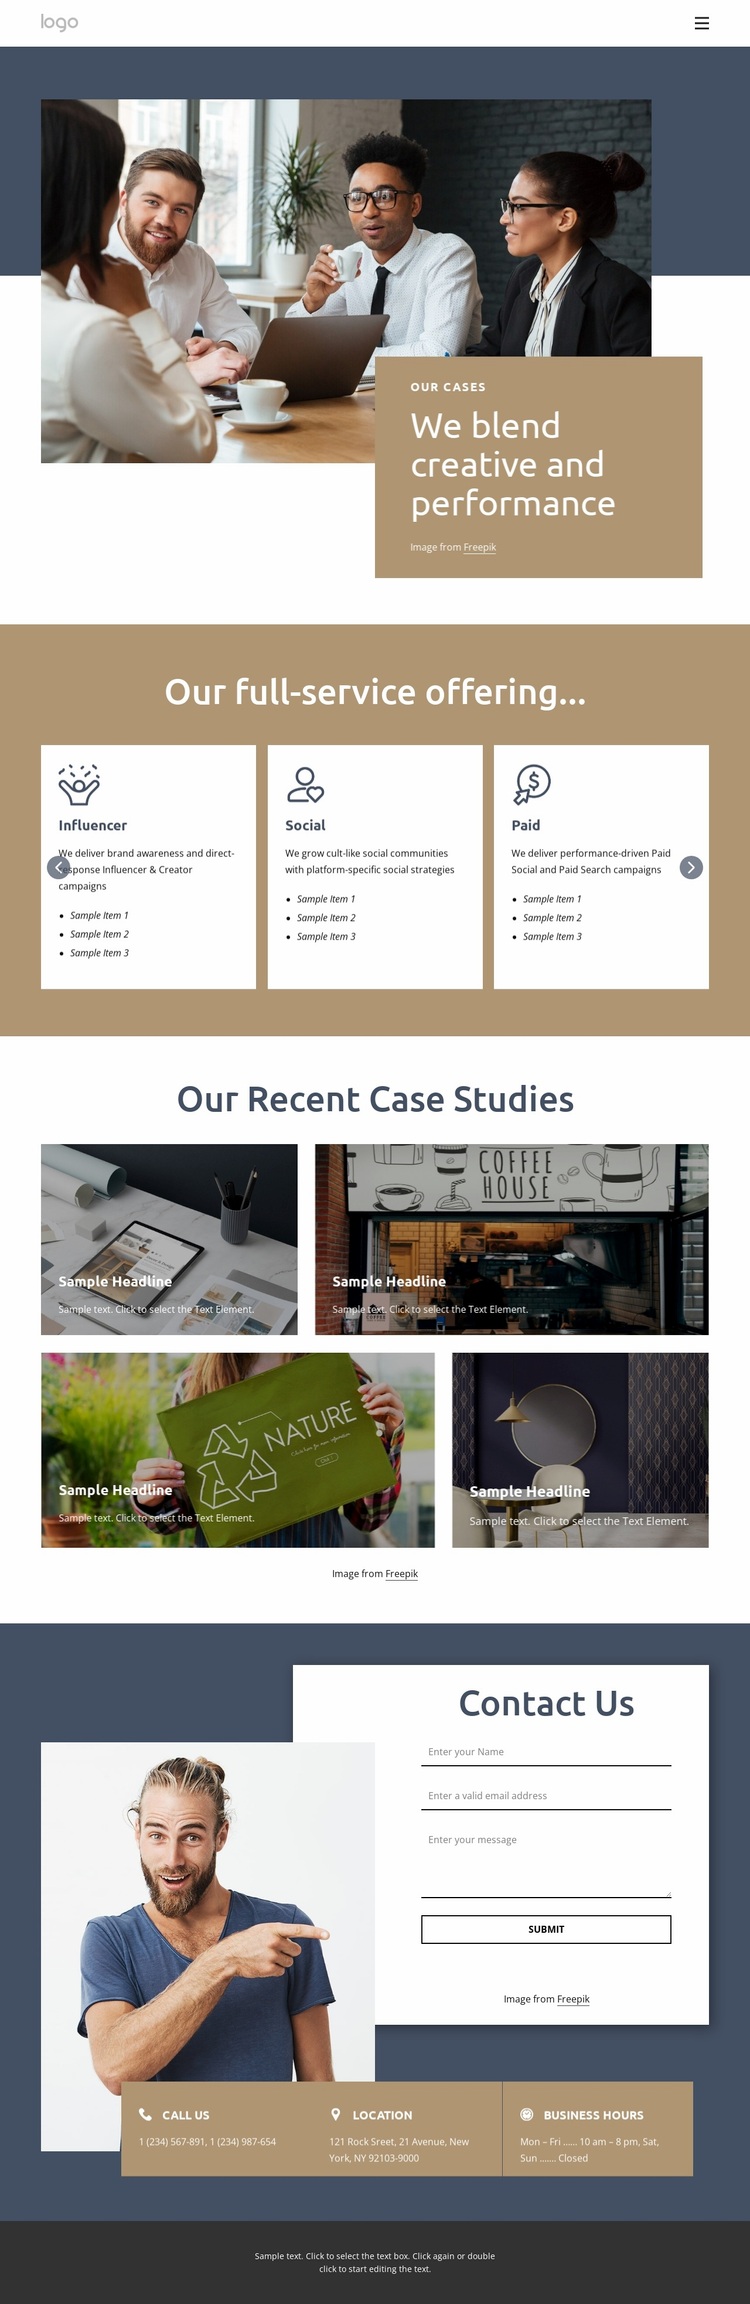 Solve real management consulting cases Website Design